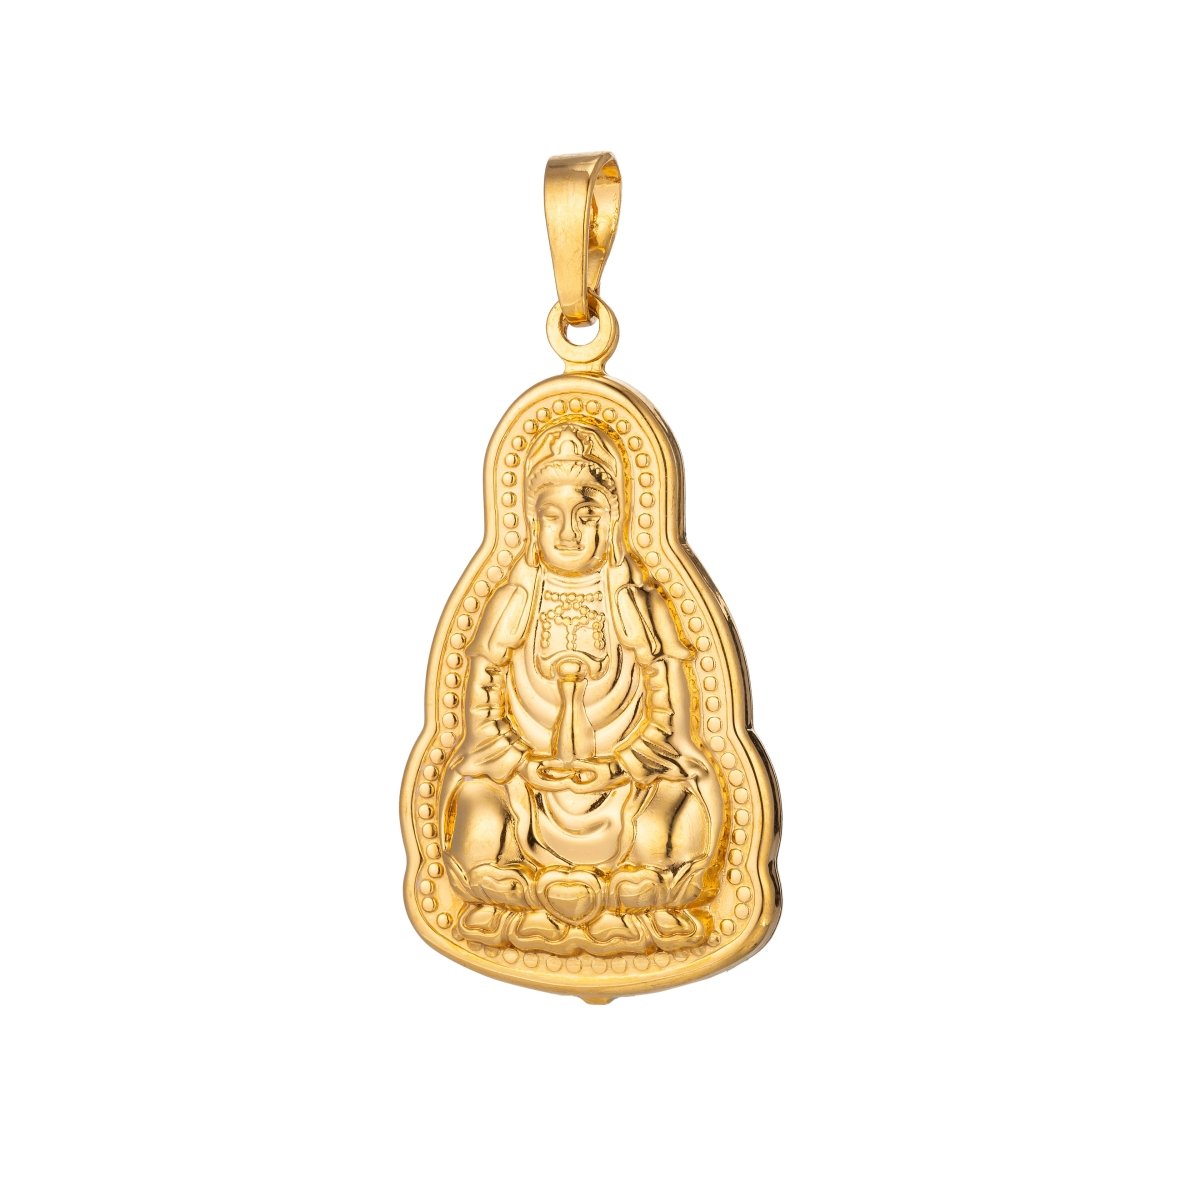 24K Gold Buddha, Golden Statue, Religious Gift, Peace, DIY Necklace Pendant Charm Bead Bails Findings for Jewelry Making H-477 - DLUXCA